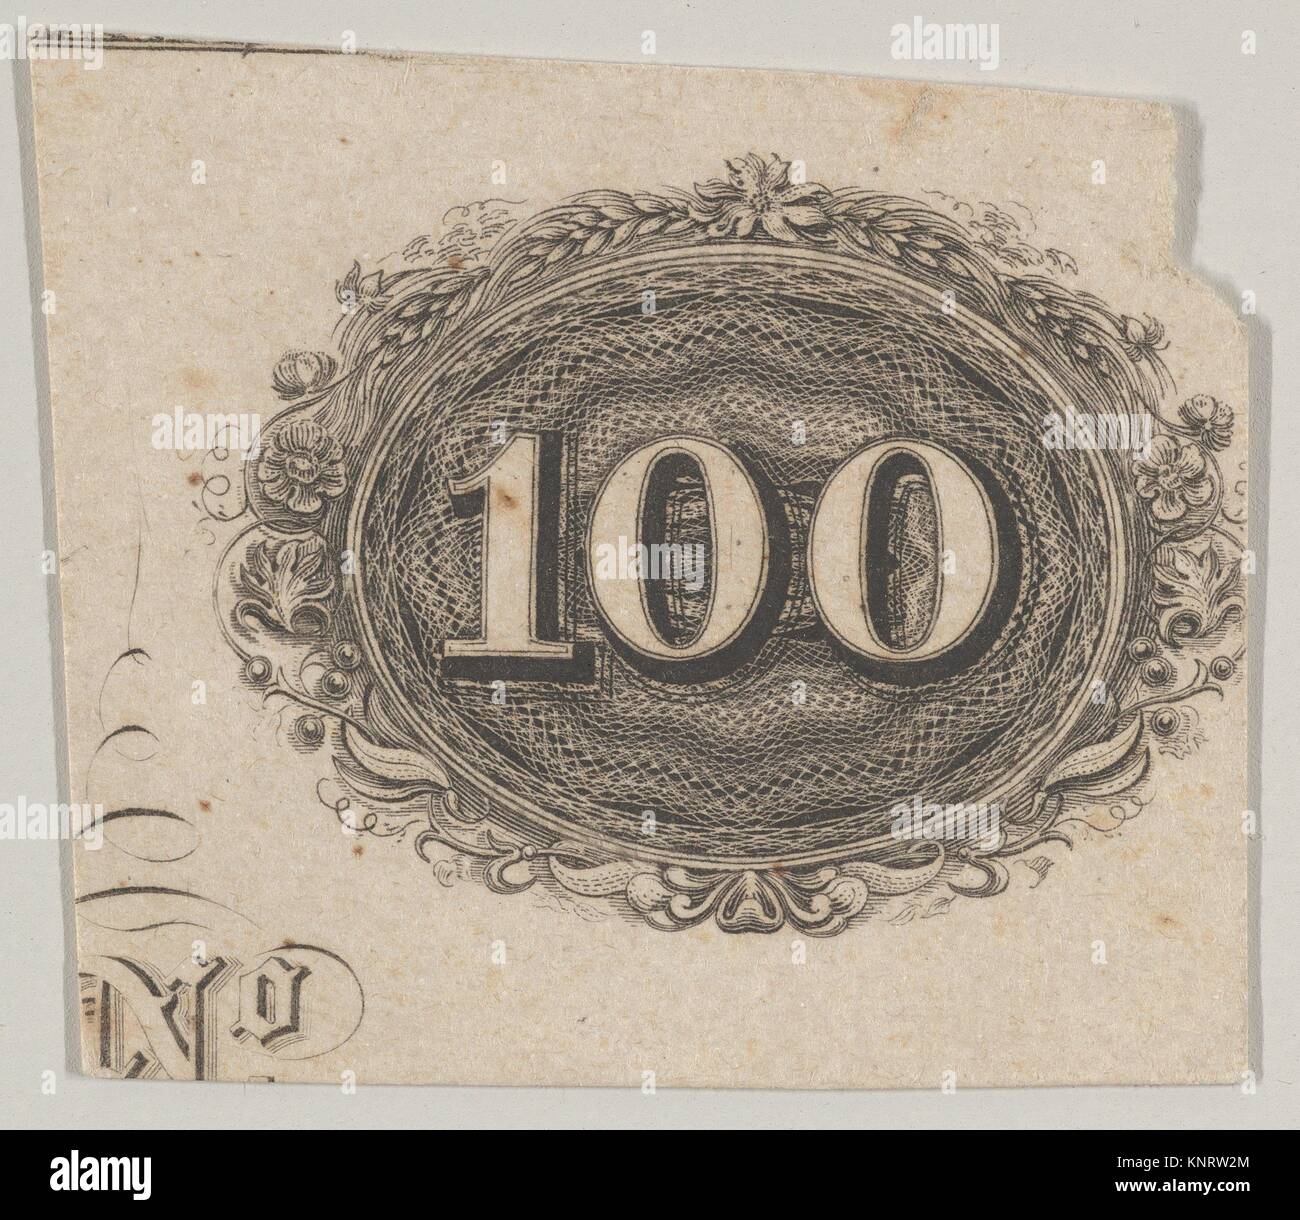 Banknote motif: the number 100 against an ornamental lathe work oval resembling woven rope with a border of grain, flowers and berries. Artist: Stock Photo